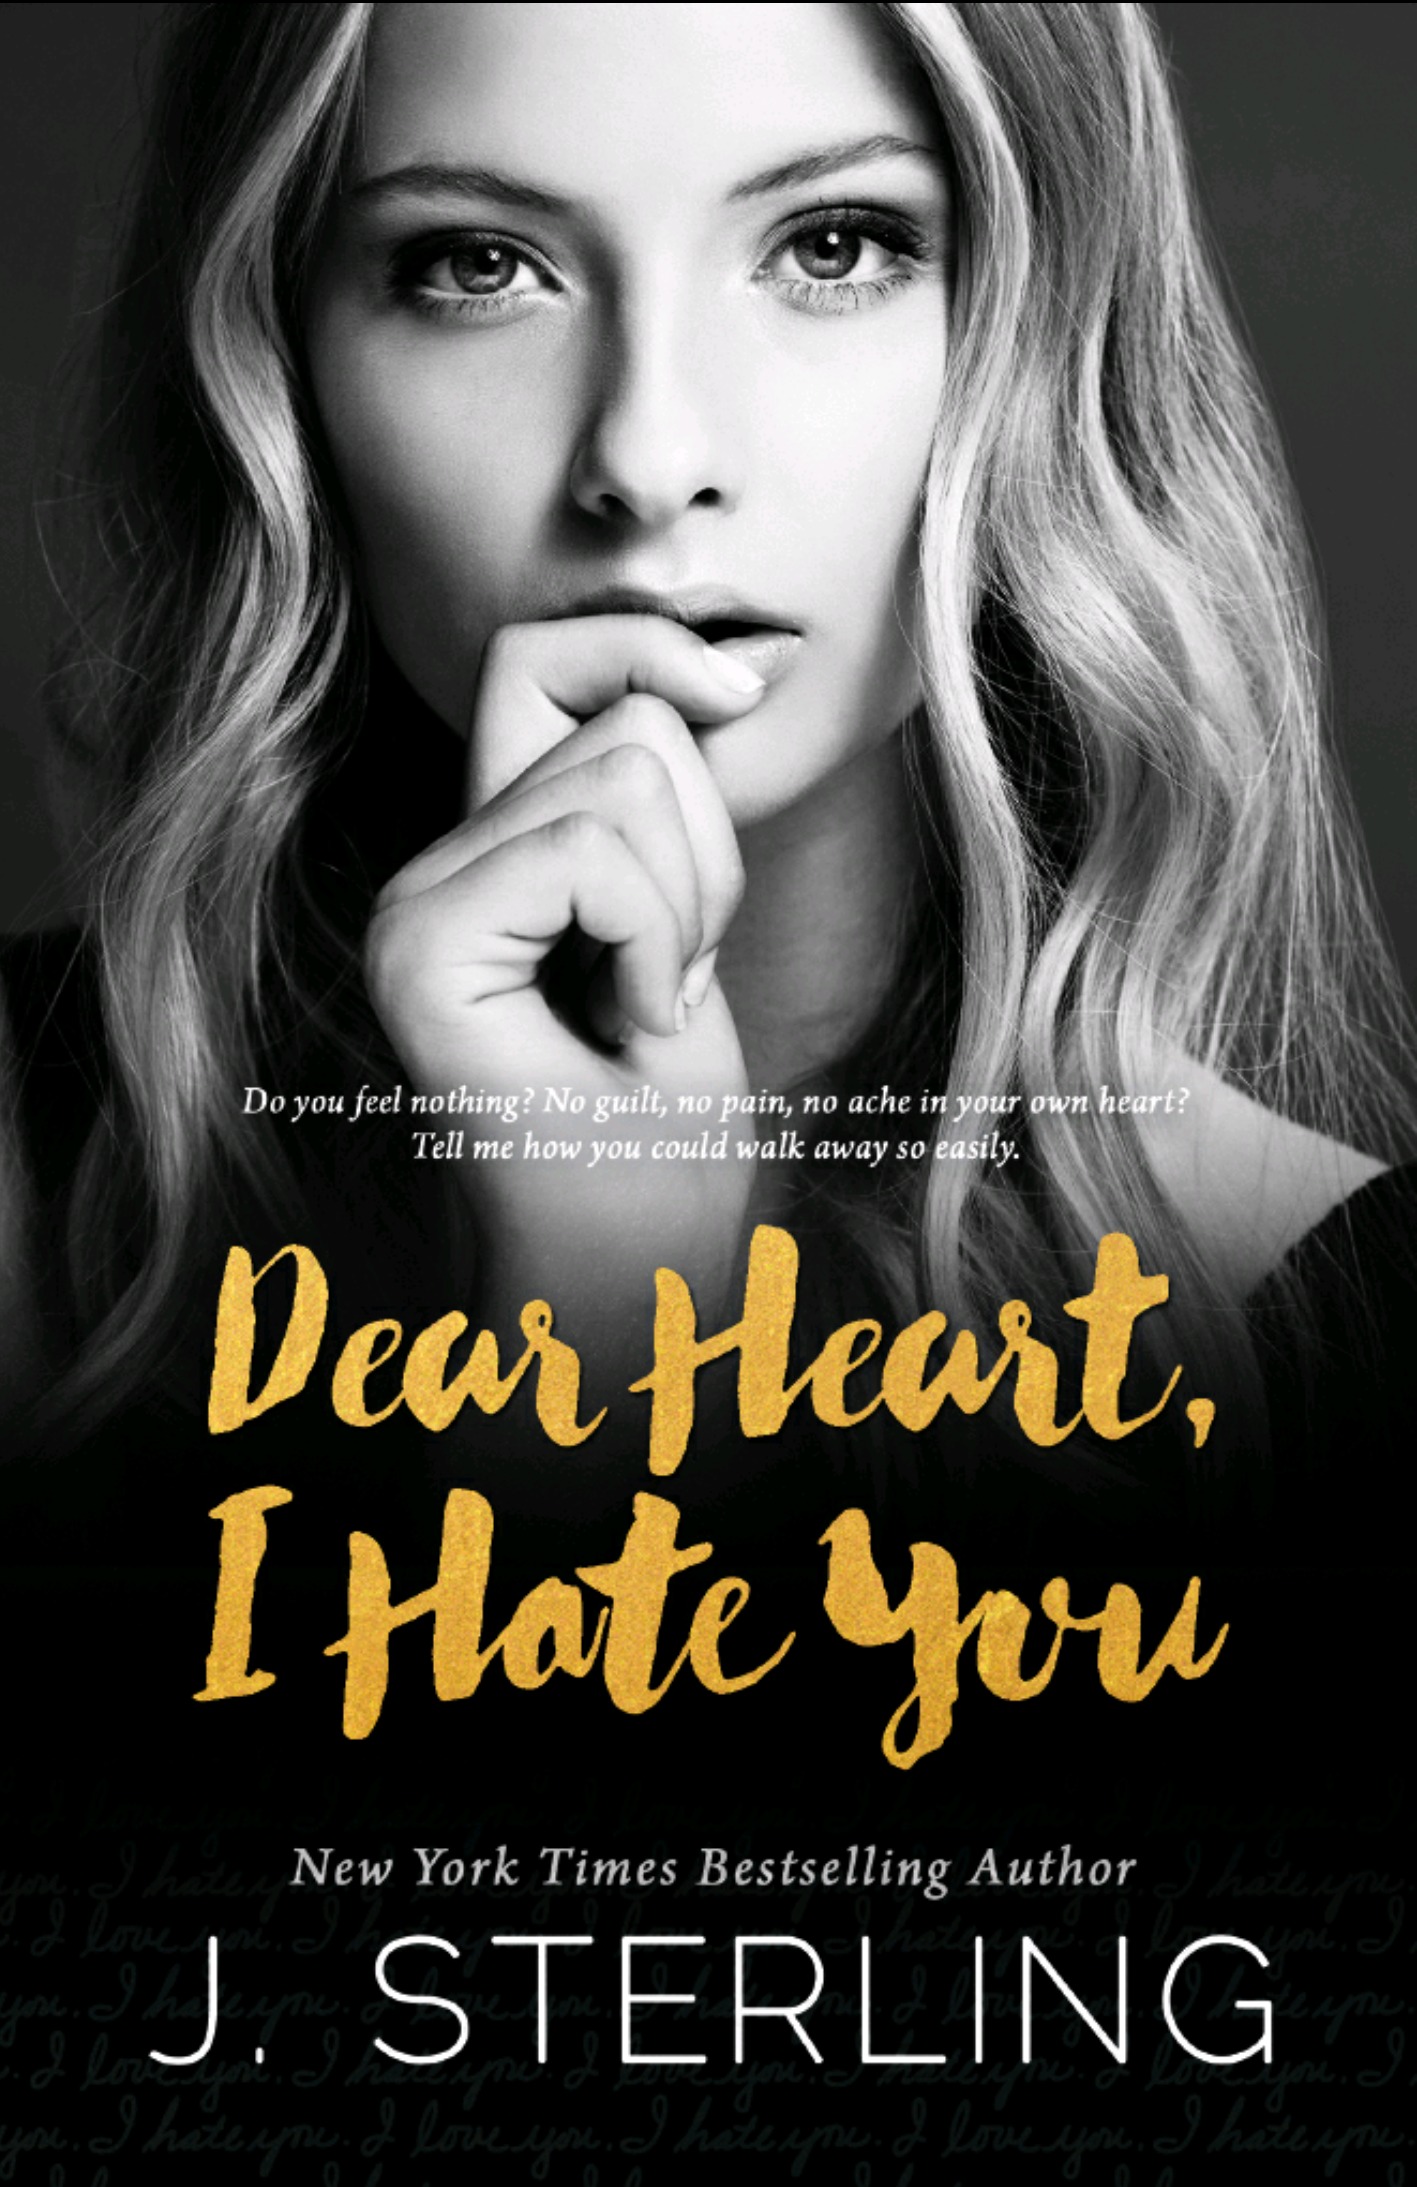 Dear Heart, I Hate You by J. Sterling Cover Reveal